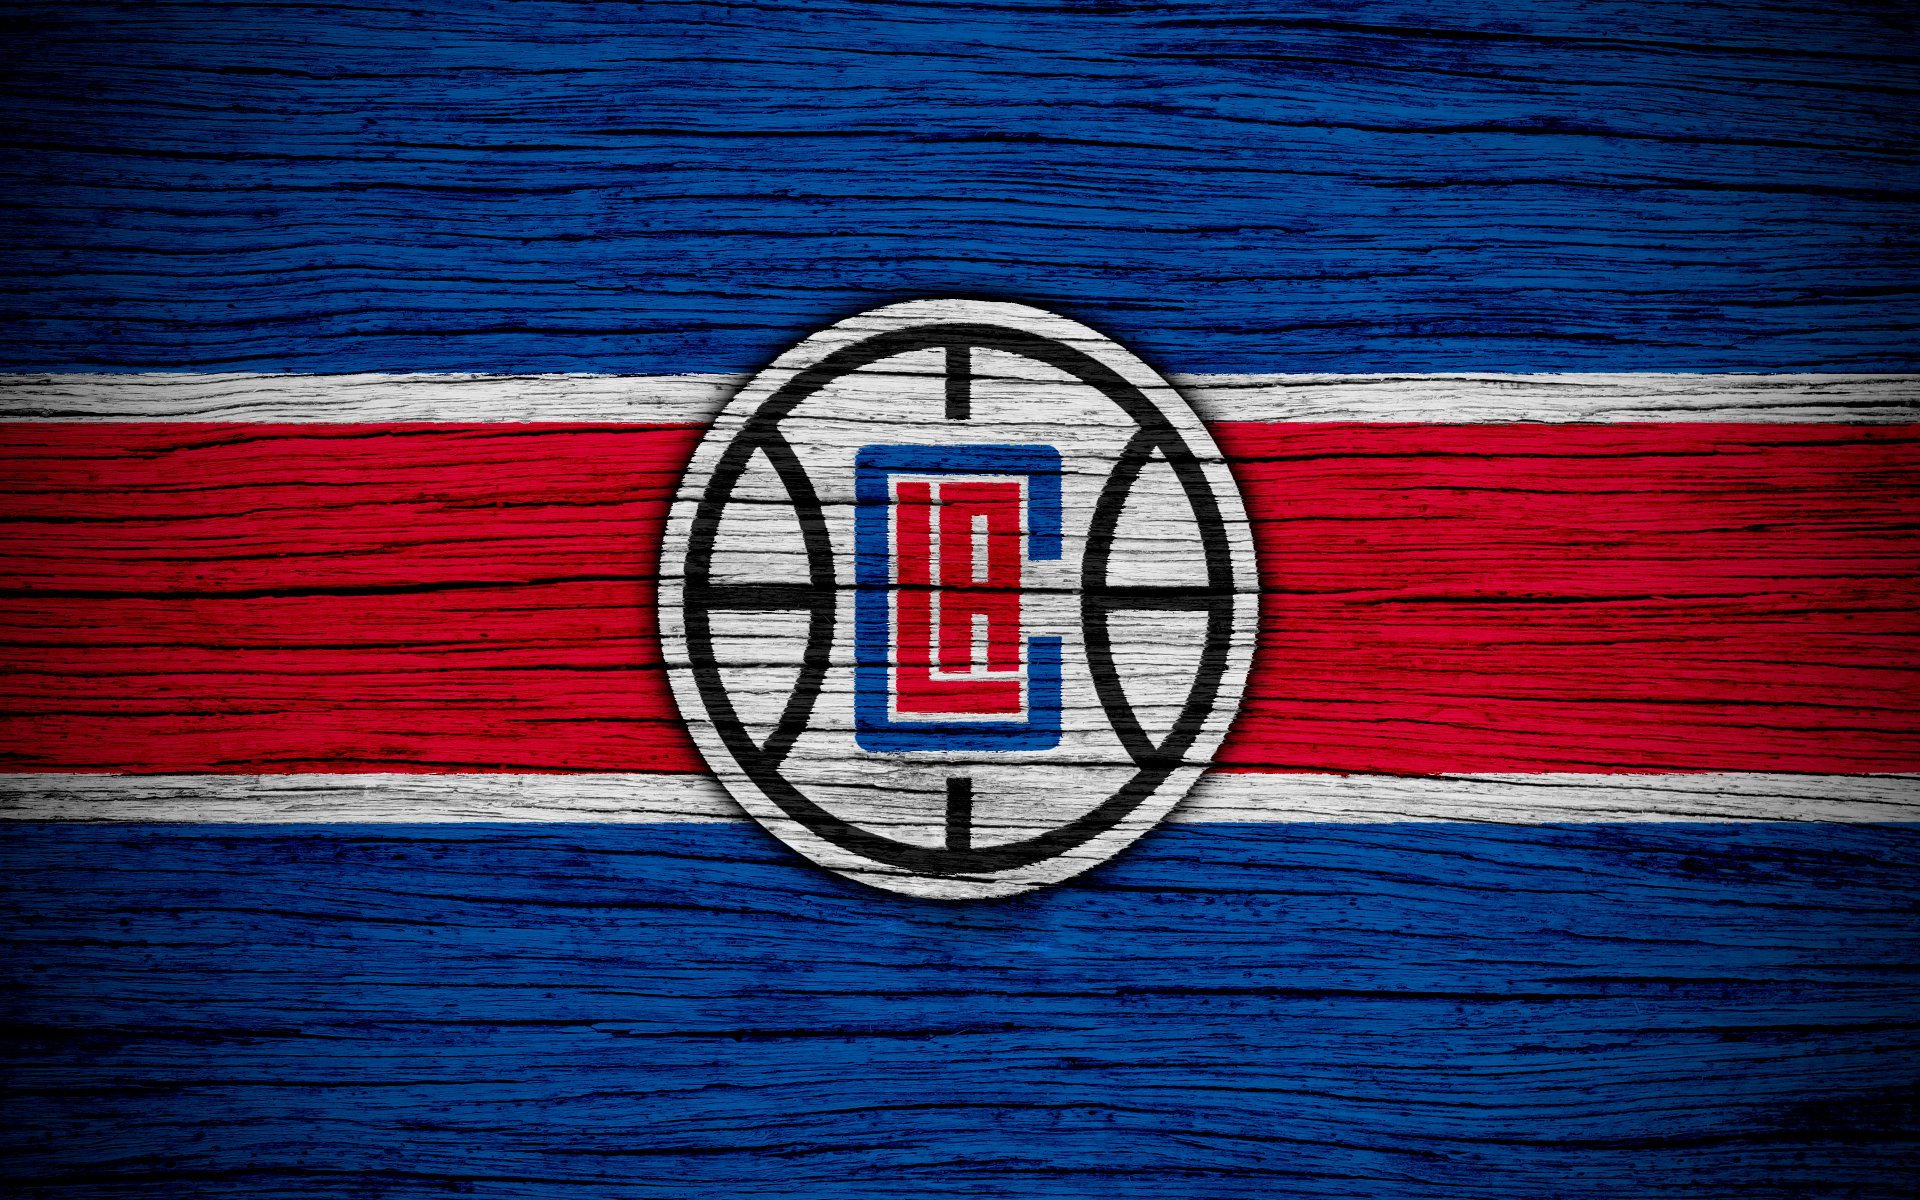 Super awesome Clippers phone wallpaper for anyone looking for one  r LAClippers